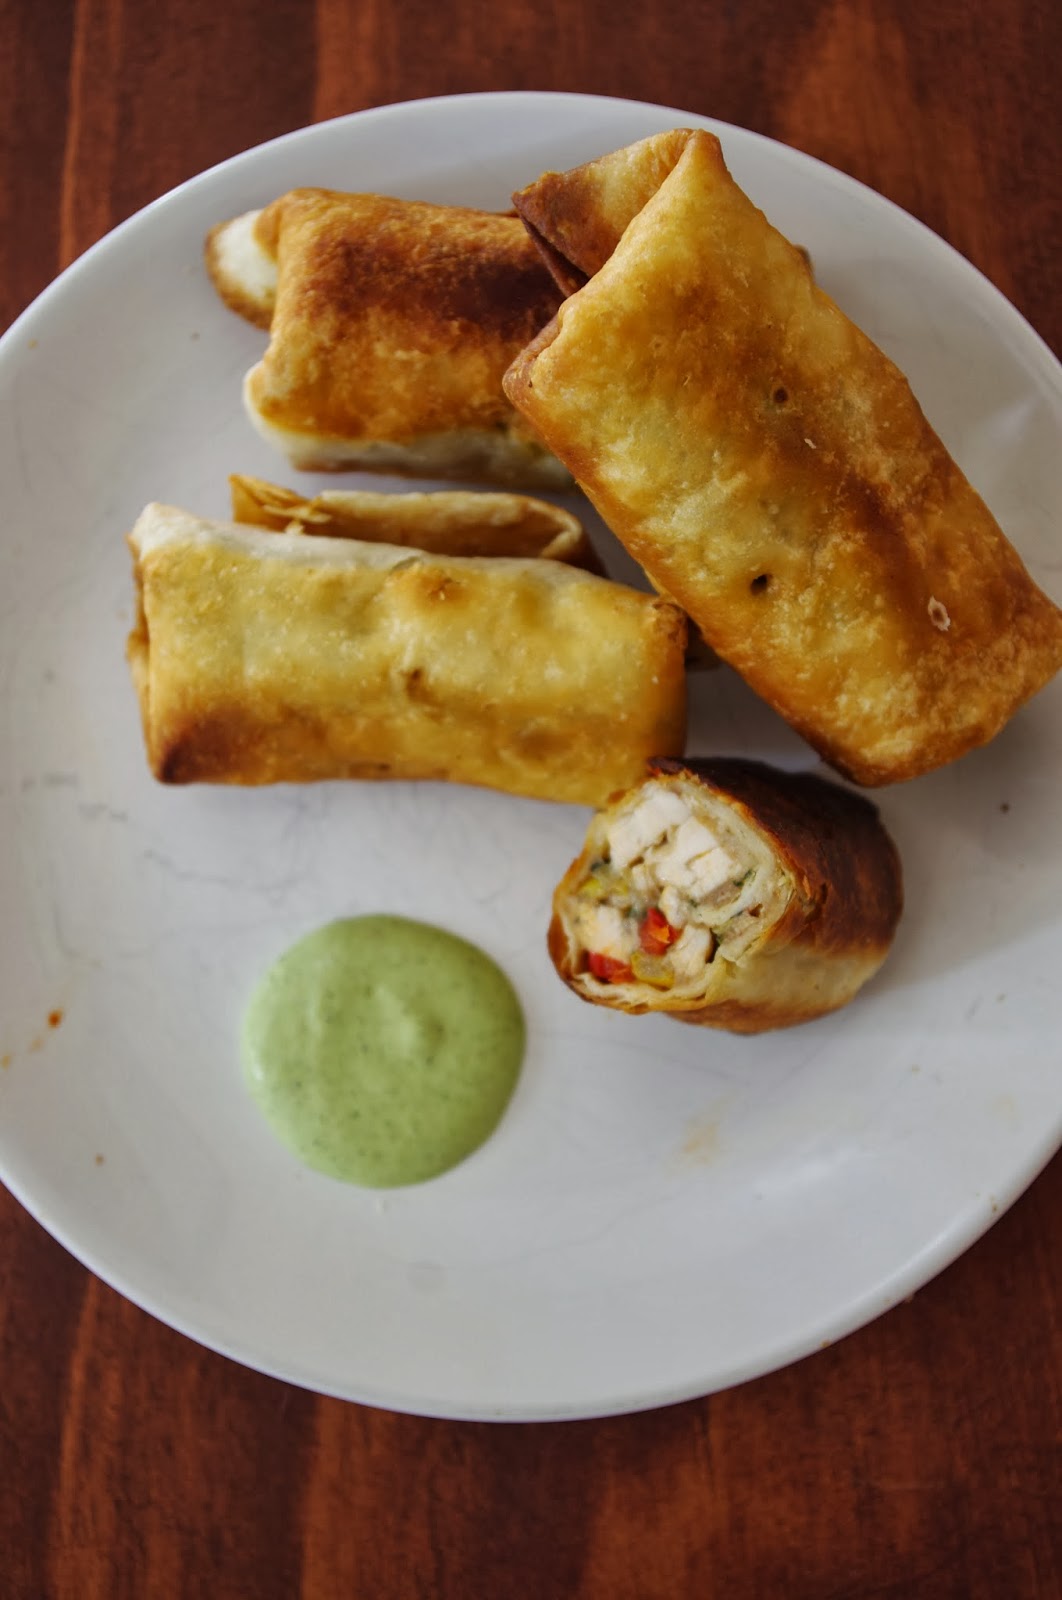 Let's Eat!: Southwestern Egg Rolls with Cilantro Dipping Sauce